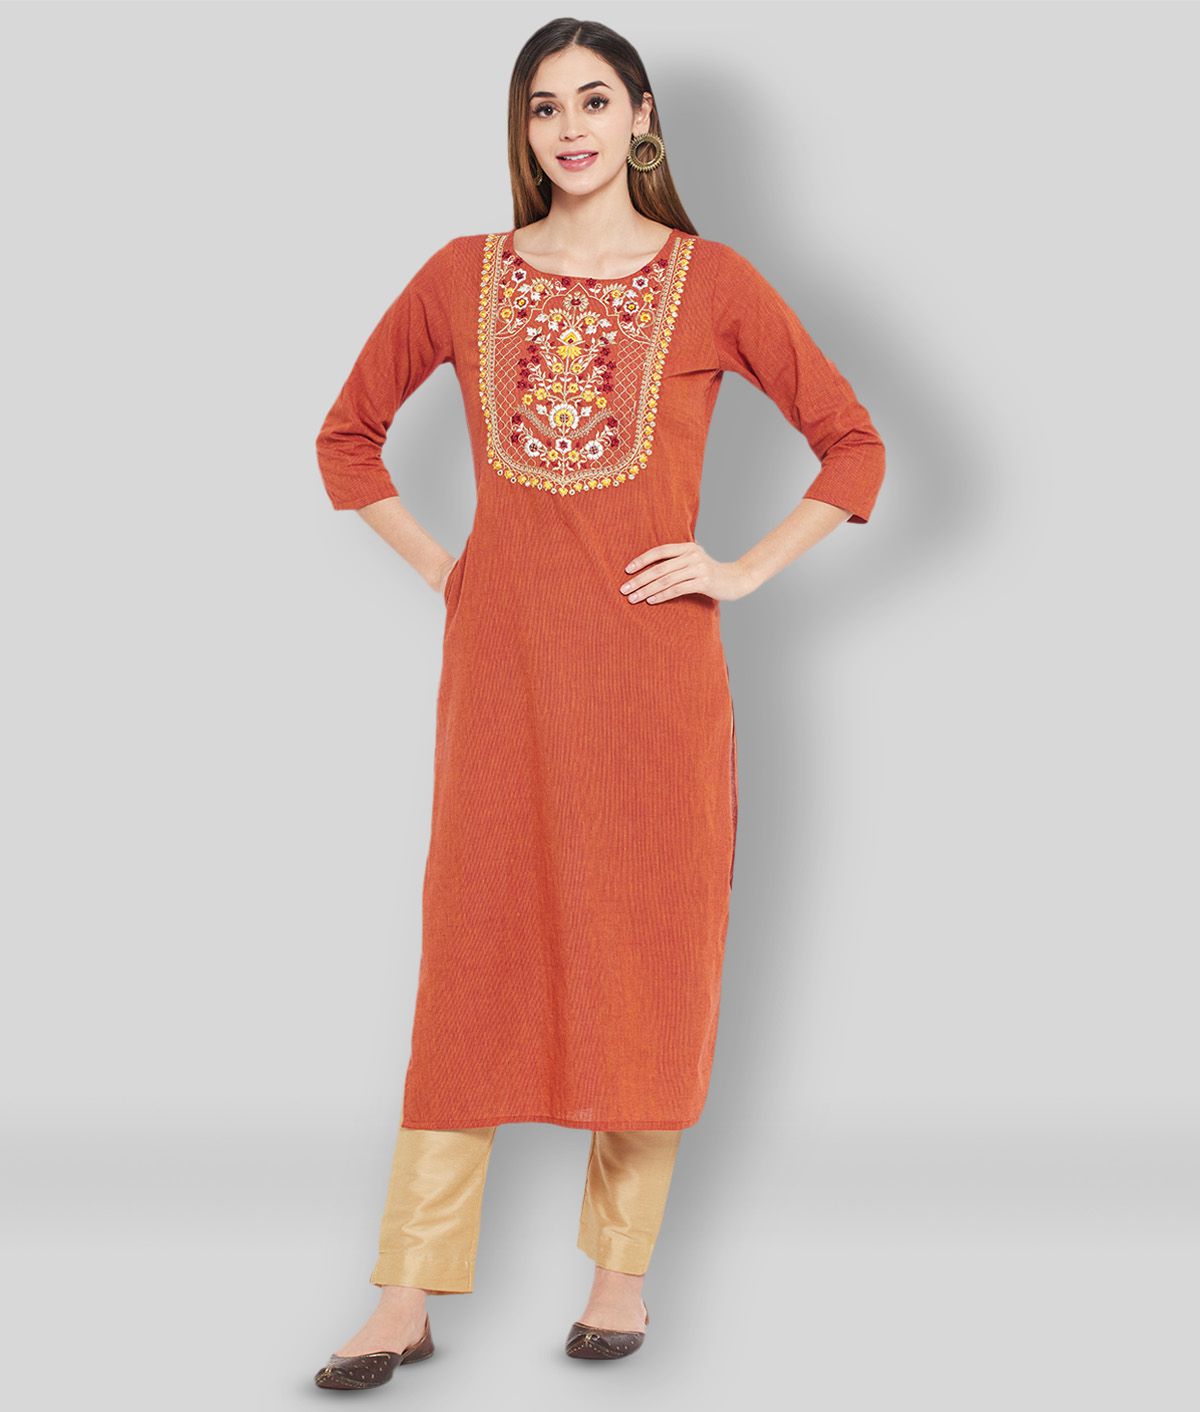 KIPEK  Yellow Cotton Womens Front Slit Kurti  Buy KIPEK  Yellow Cotton  Womens Front Slit Kurti Online at Best Prices in India on Snapdeal